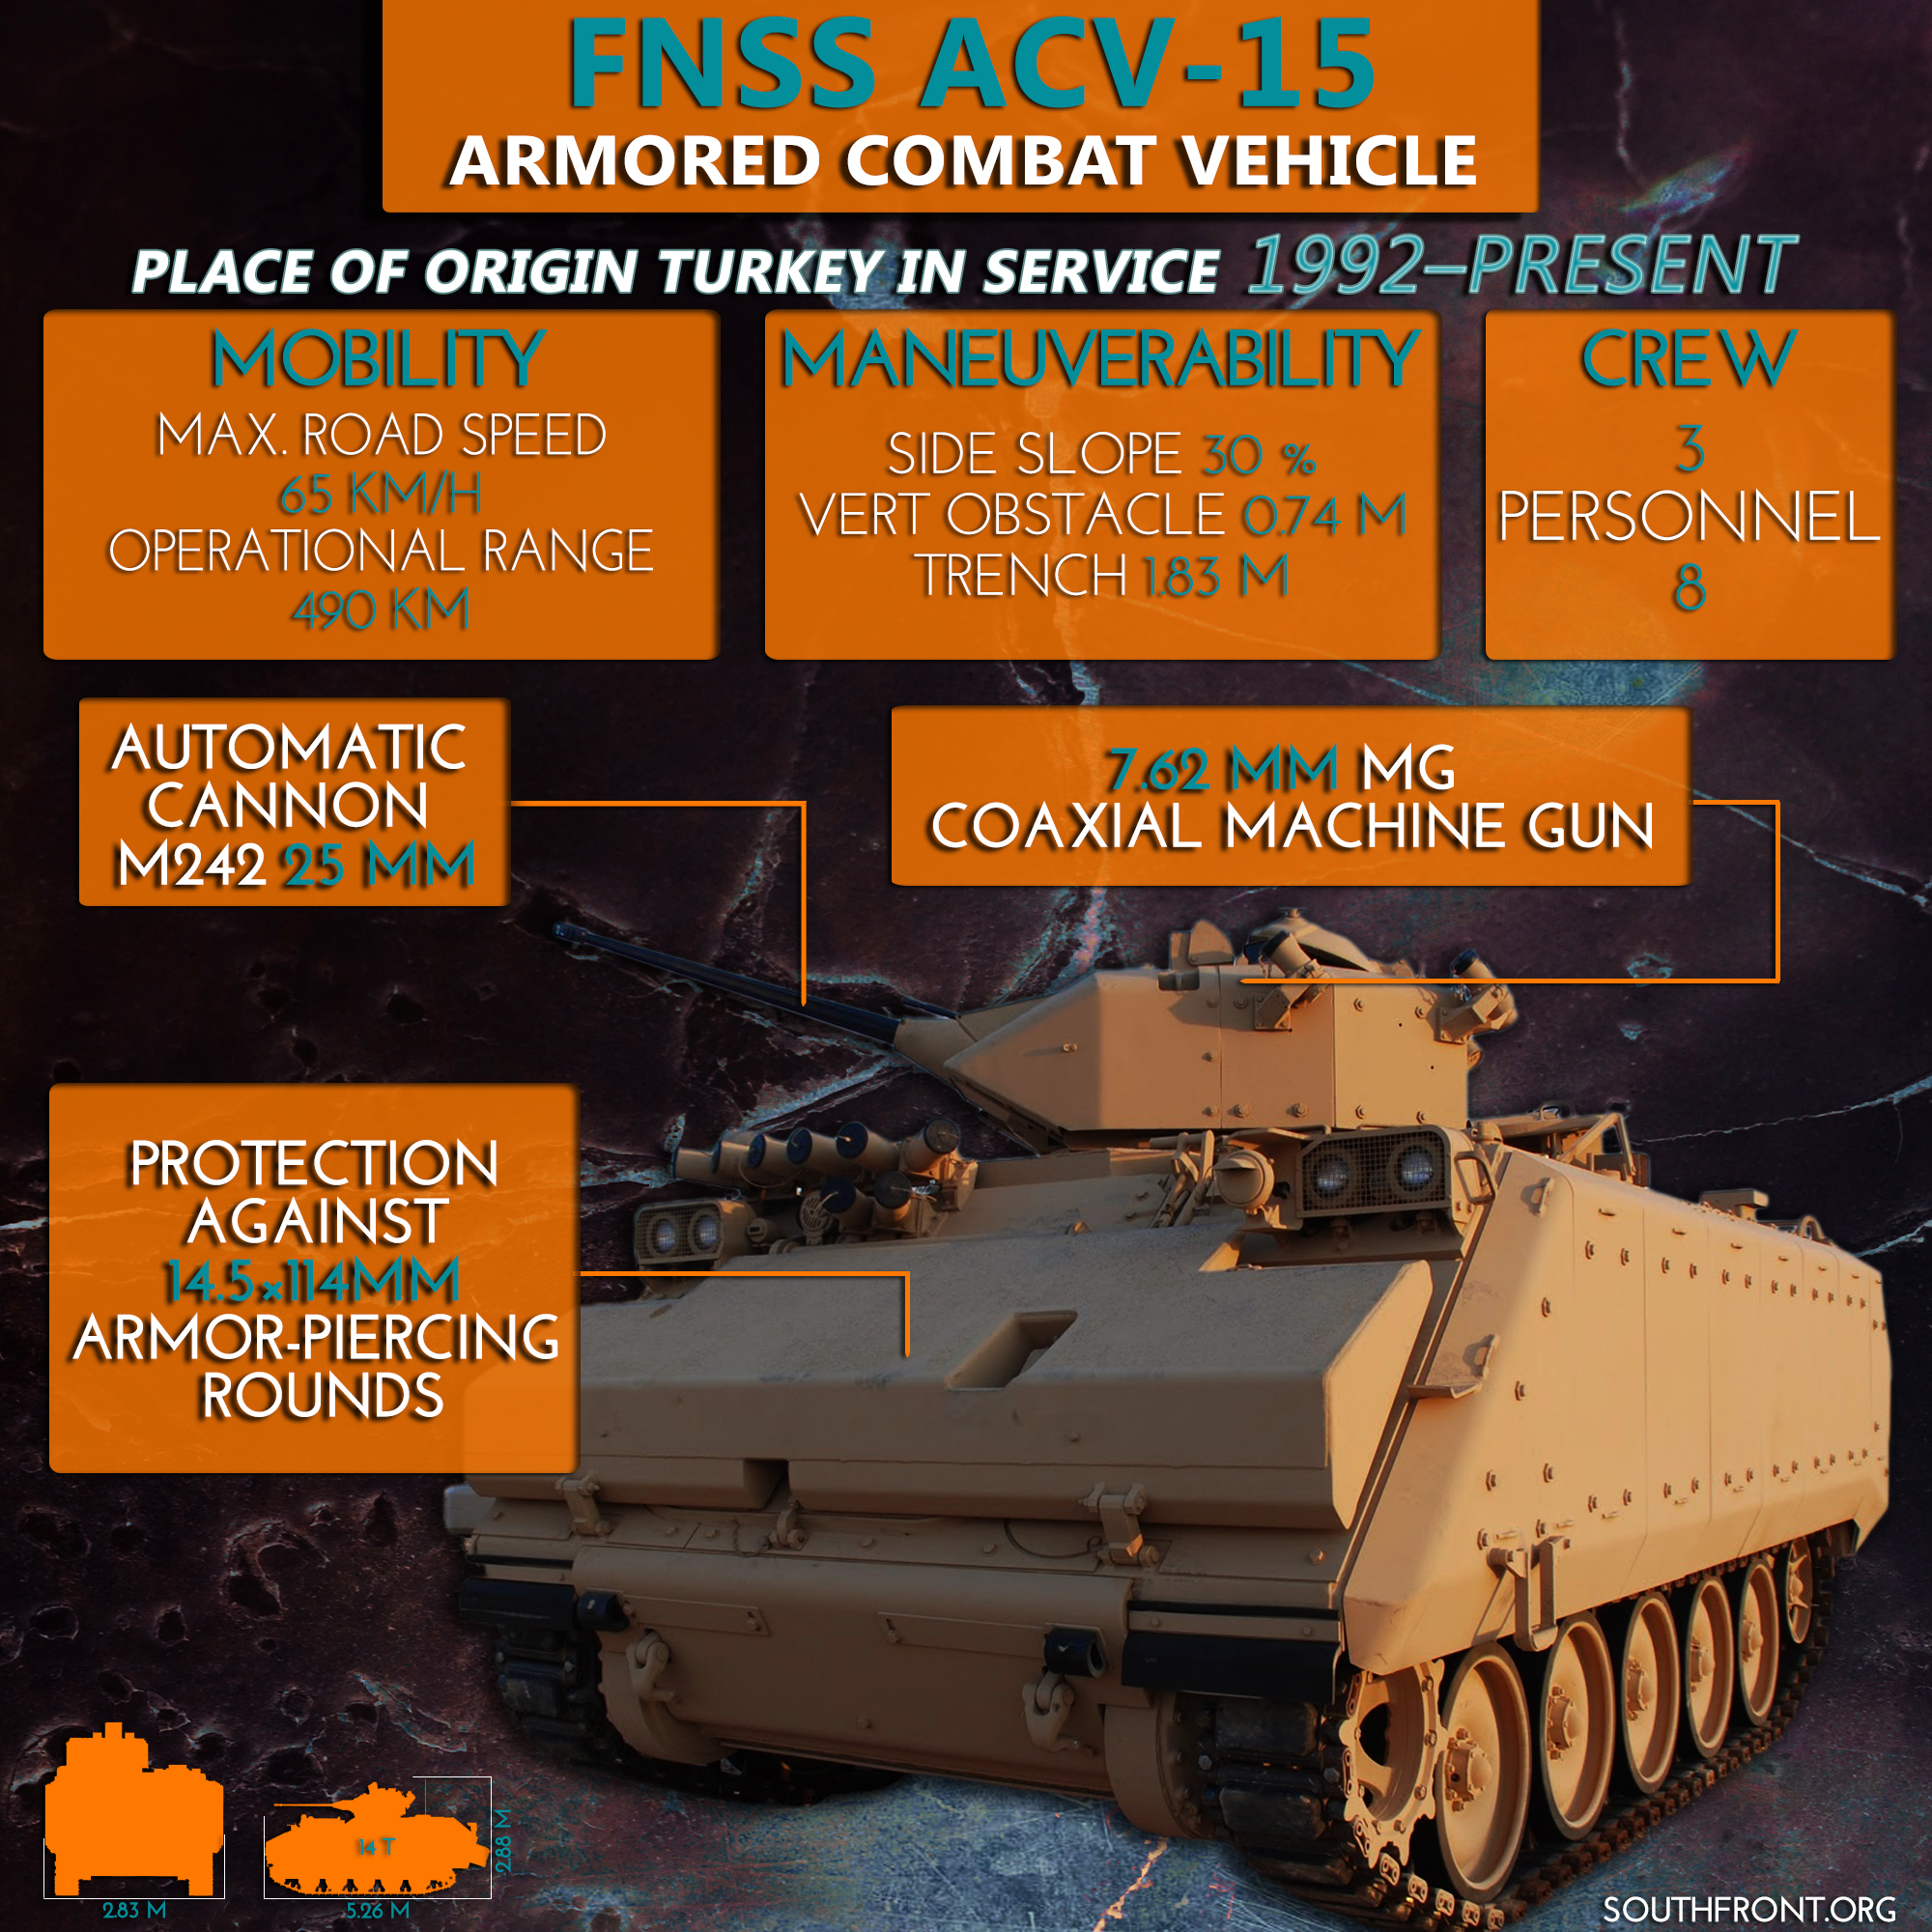 Turkey Supplies ACV-15 Armored Combat Vehicles to Militants in Syria (Infographics, Video)